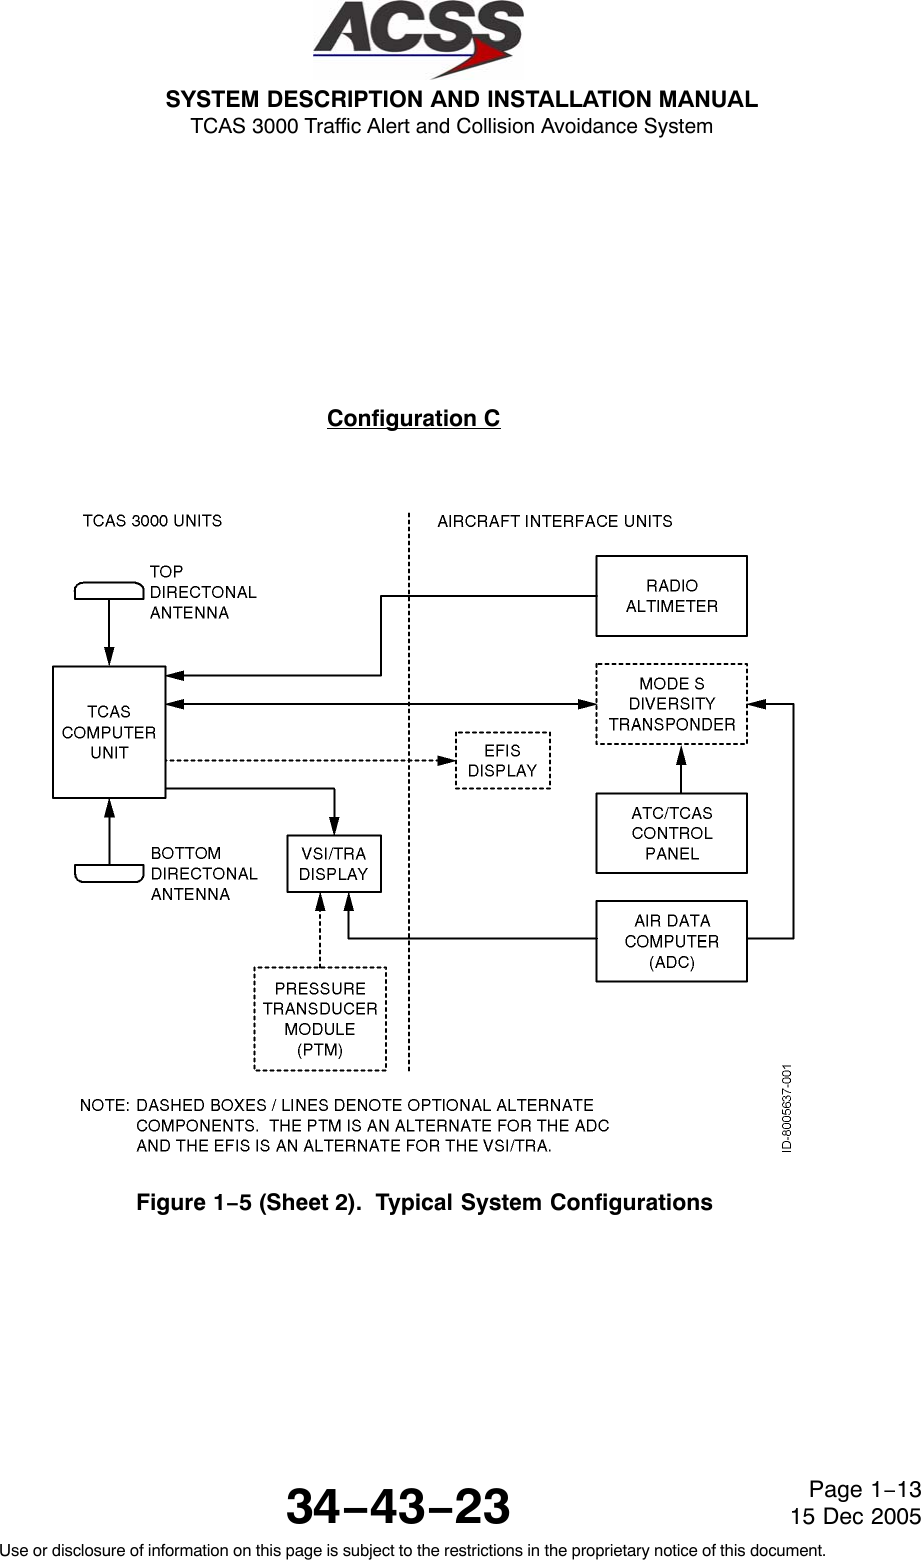 SYSTEM DESCRIPTION AND INSTALLATION MANUAL TCAS 3000 Traffic Alert and Collision Avoidance System34−43−23Use or disclosure of information on this page is subject to the restrictions in the proprietary notice of this document.Page 1−1315 Dec 2005Configuration CFigure 1−5 (Sheet 2).  Typical System Configurations